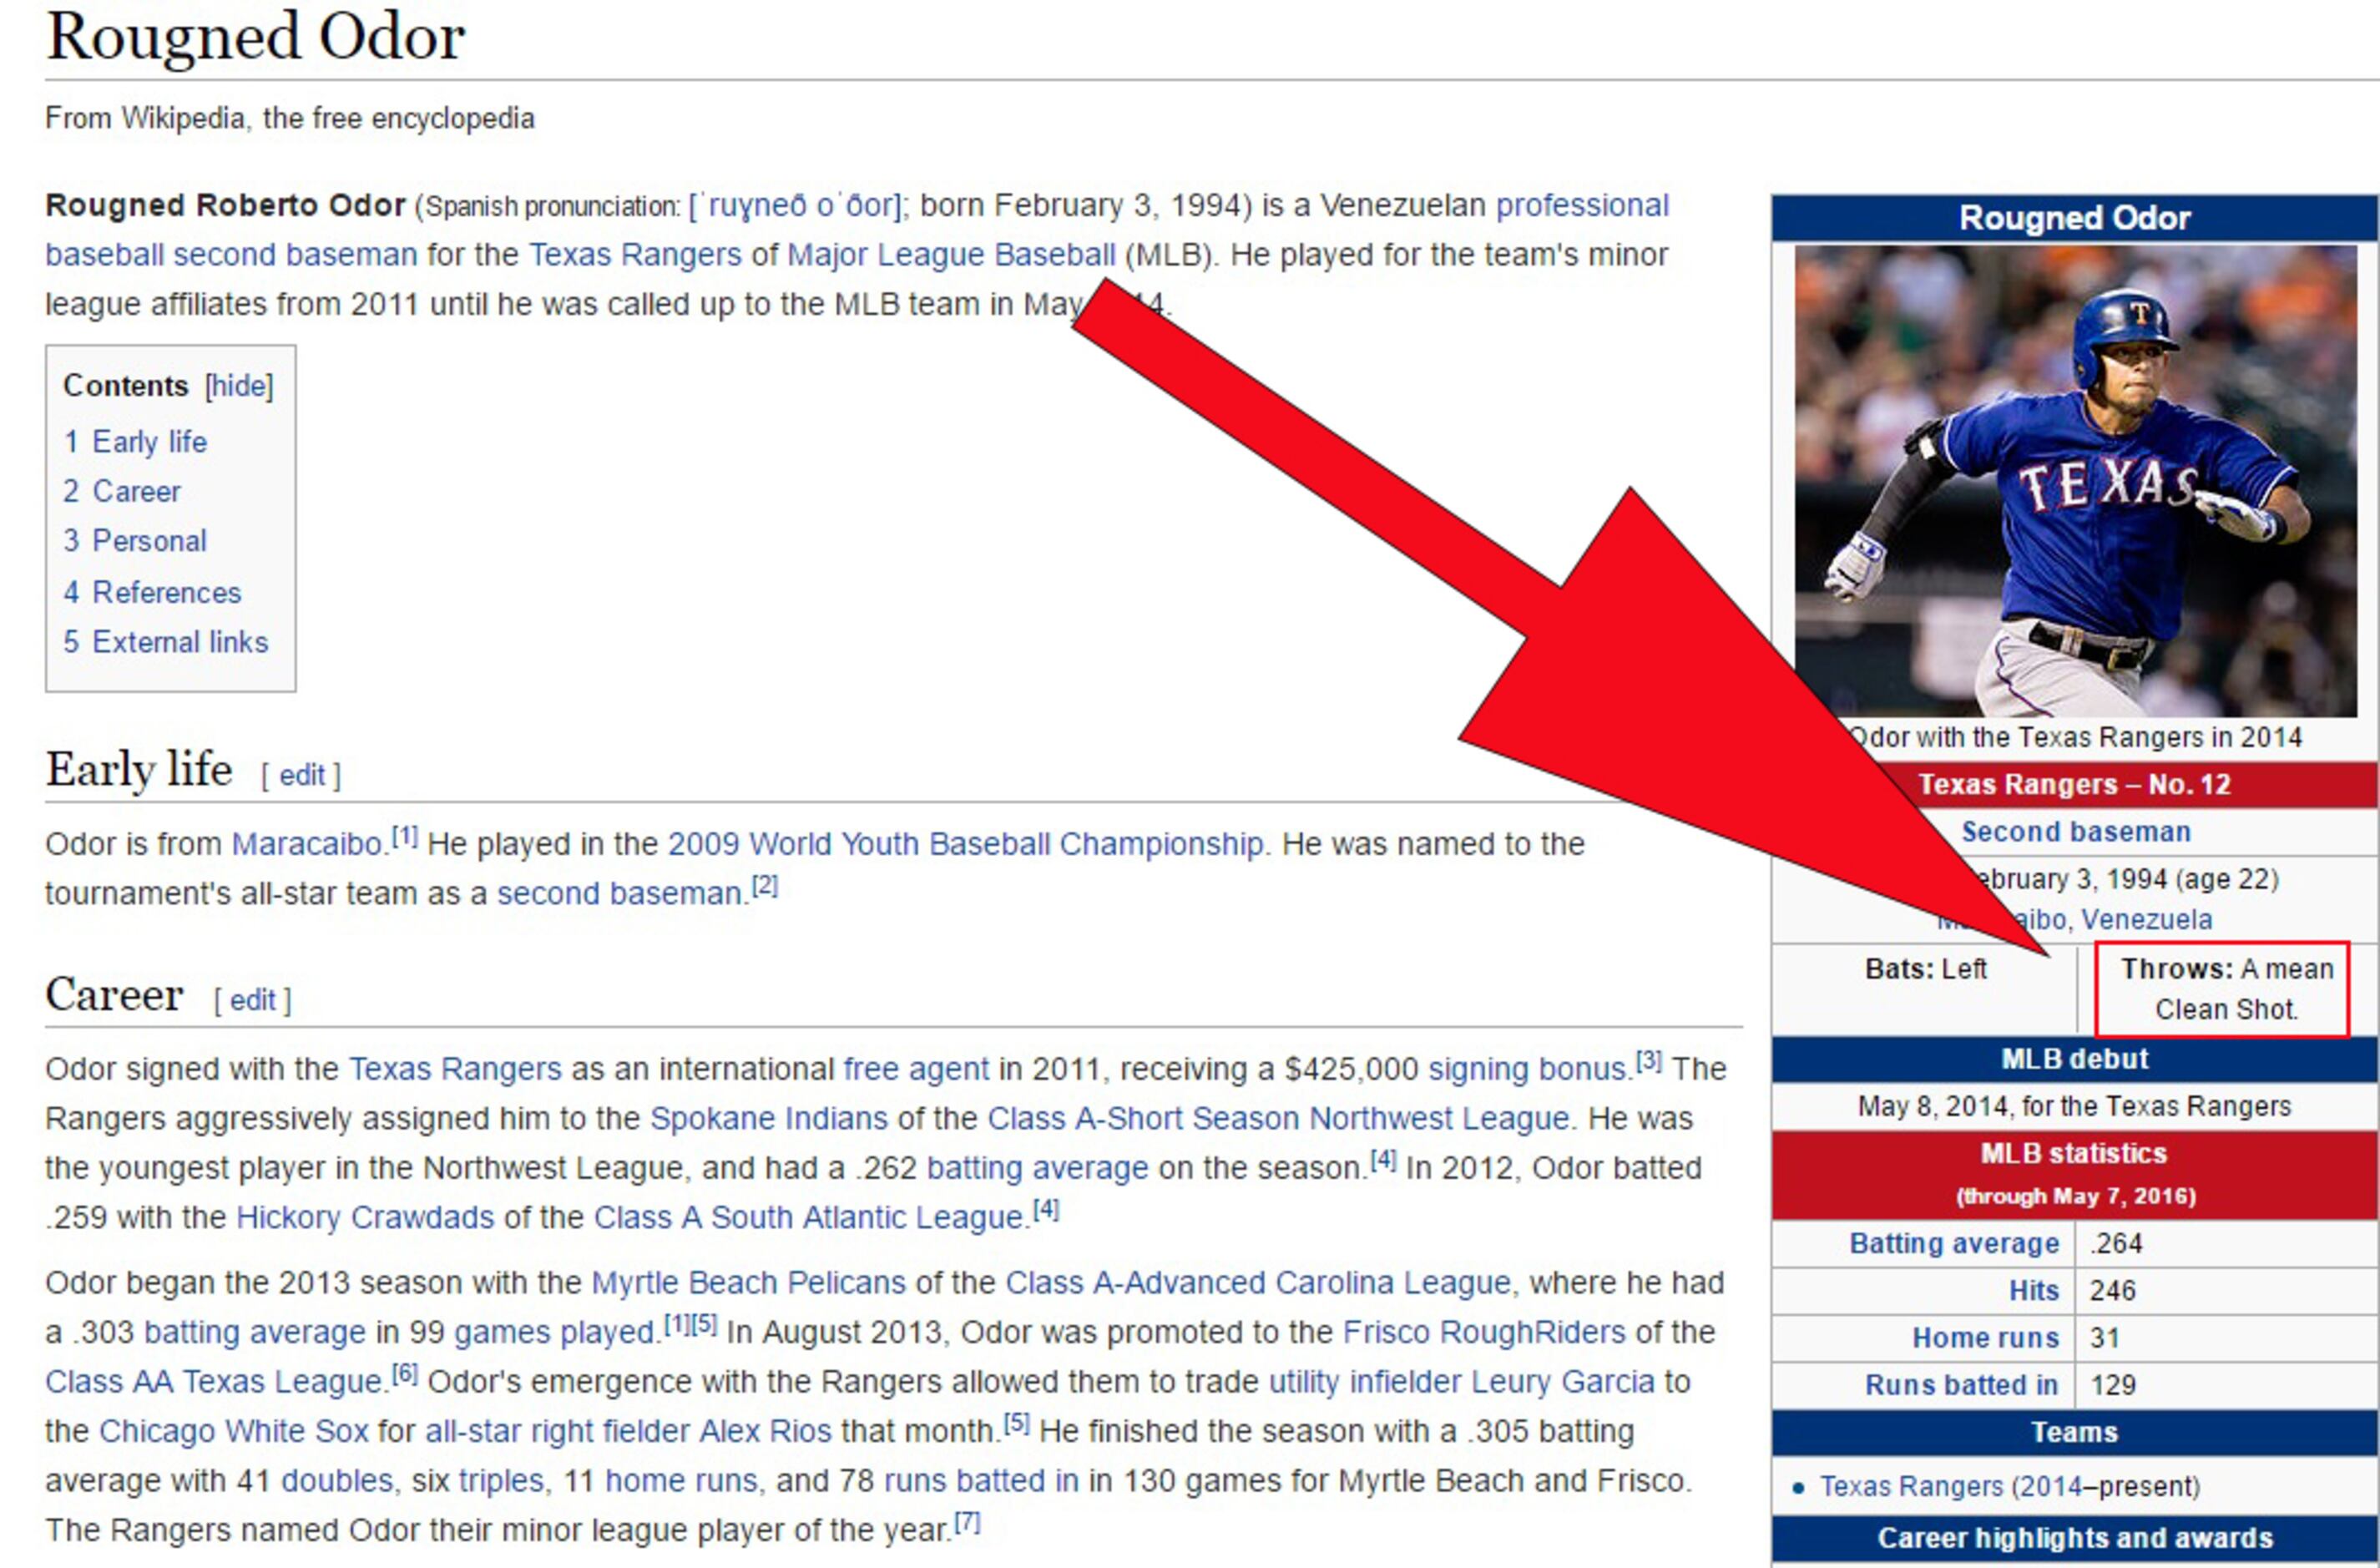 Wikipedia pages for Rougned Odor, Jose Bautista hilariously edited after  roles in Rangers-Blue Jays melee